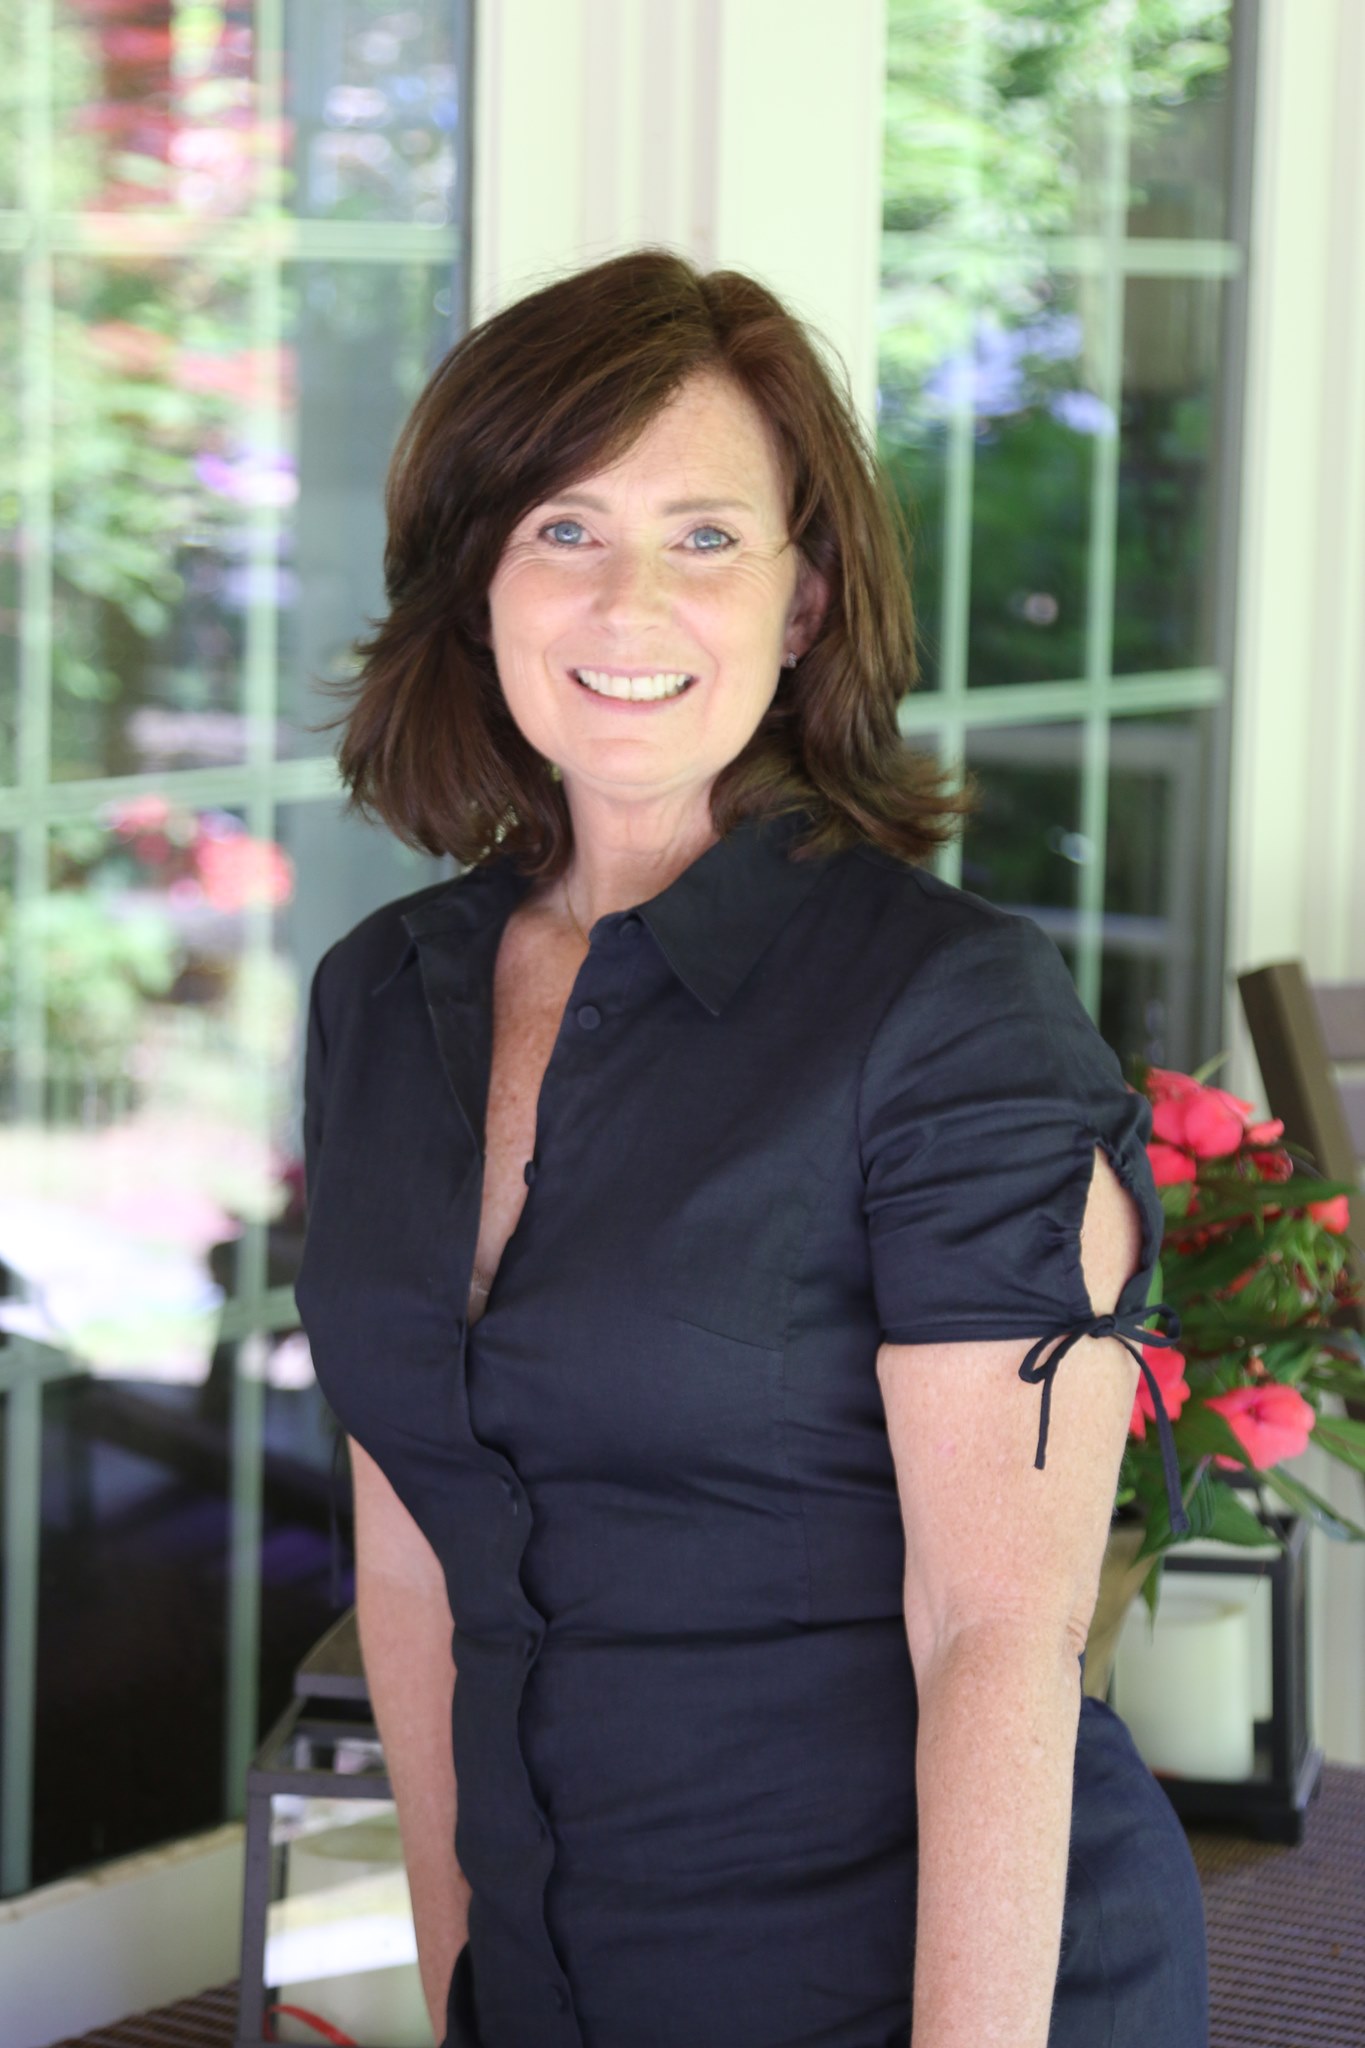 Sharon Burke, Licensed Real Estate Salesperson with Howard Hanna | Rand Realty